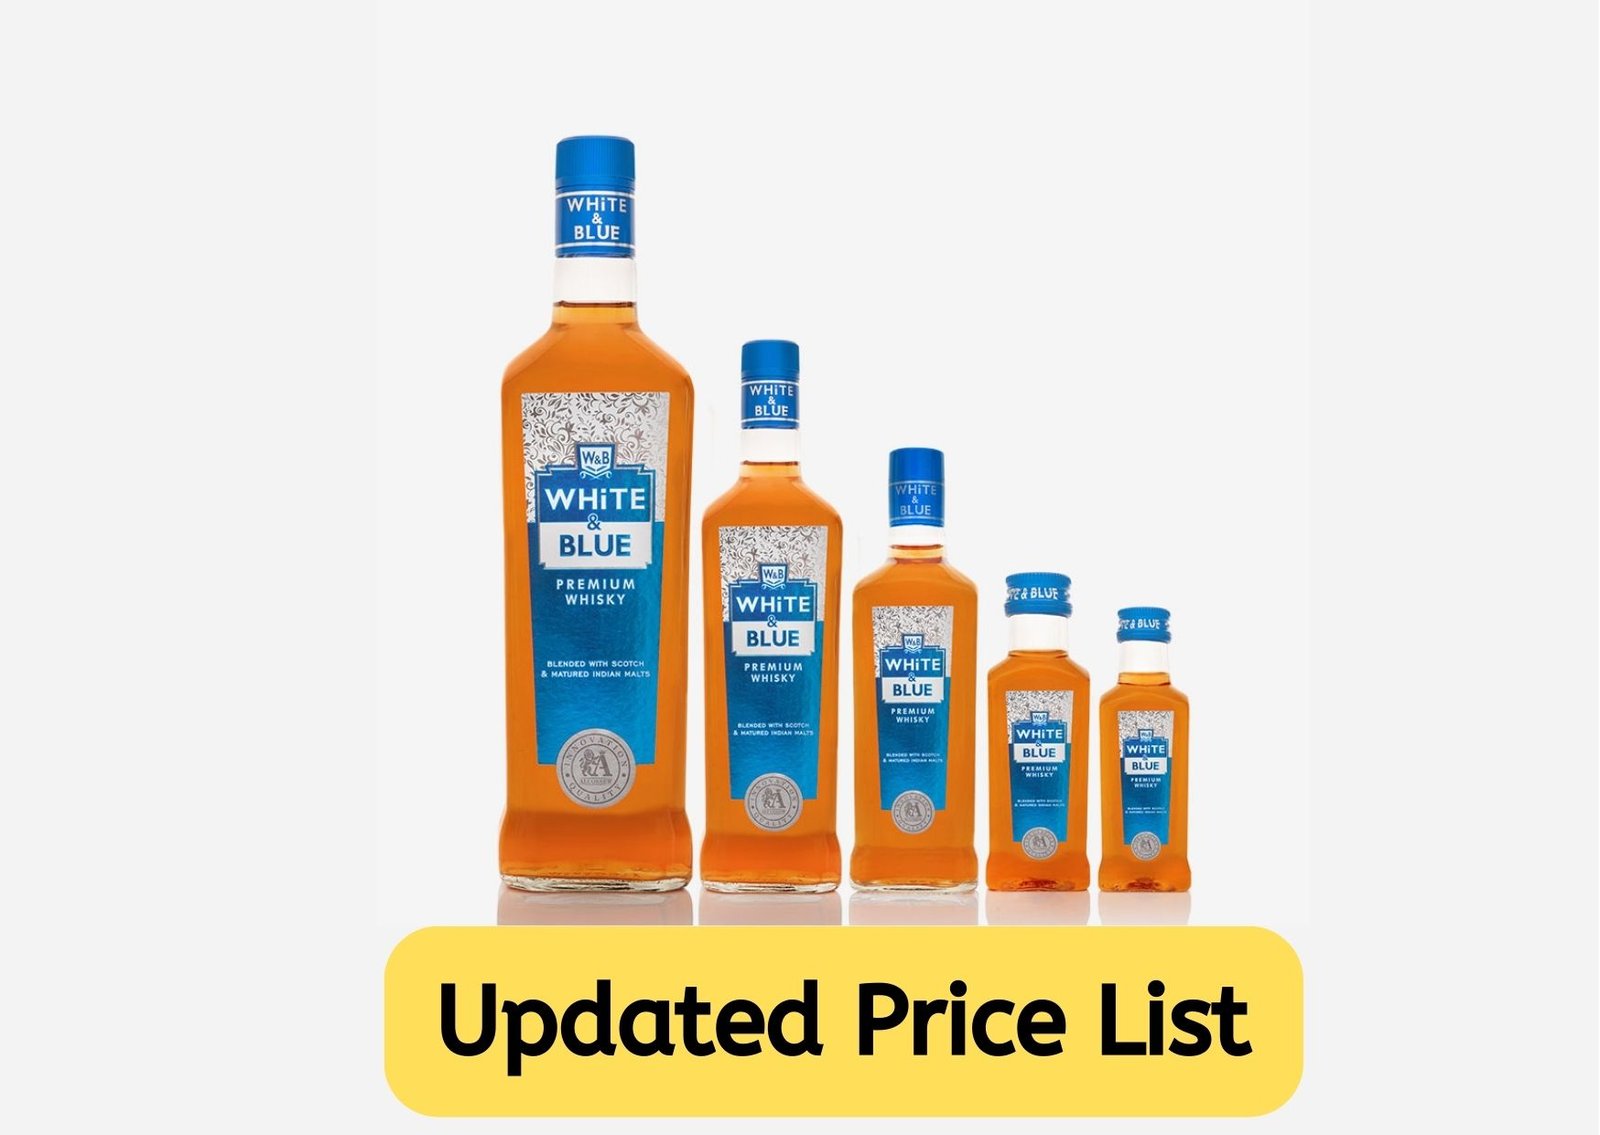 White and blue whisky price